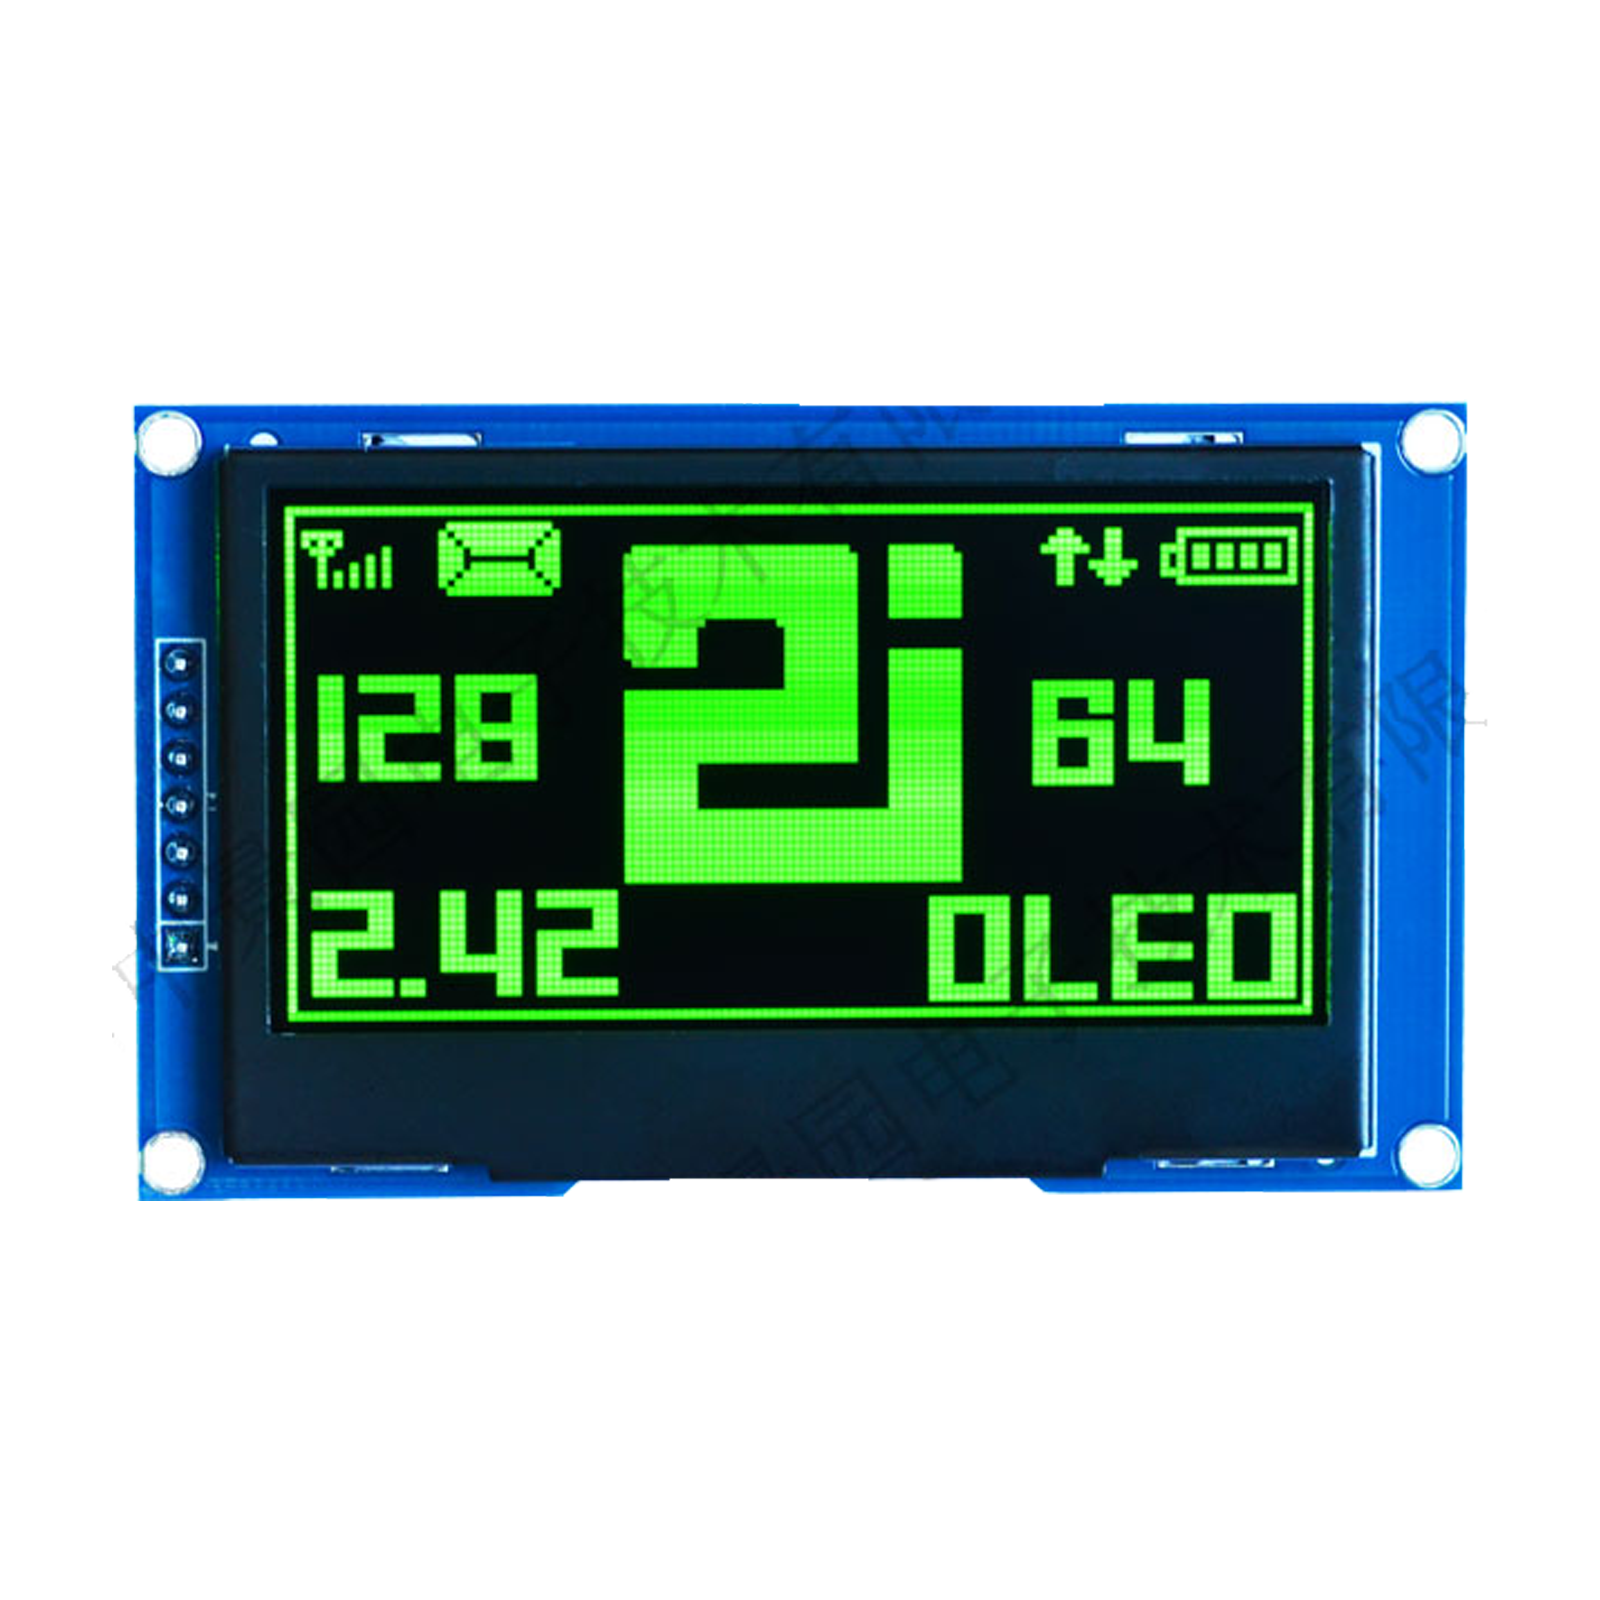 Green 2.4-inch screen displaying some numbers